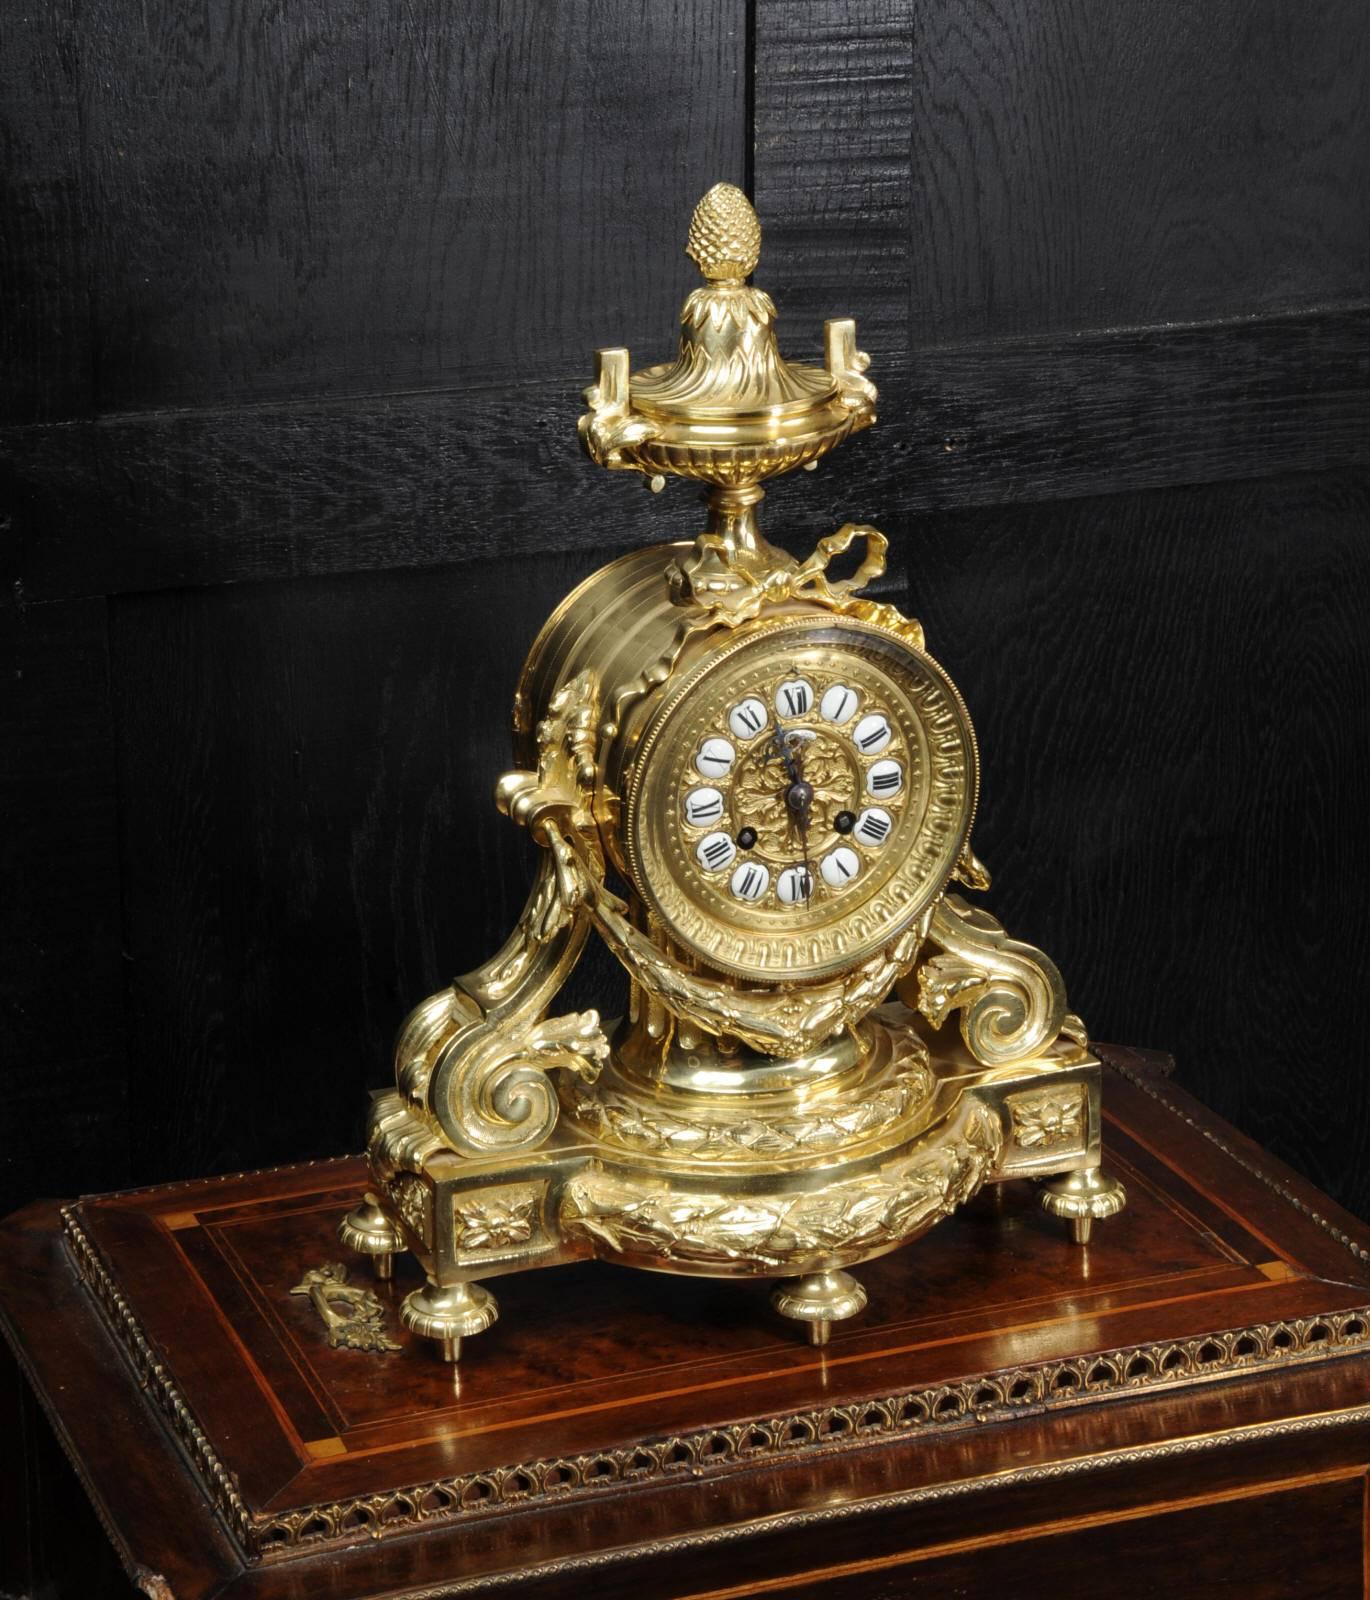 A stunning original antique French clock of neoclassical design in gilded bronze. It is in excellent condition, the movement fully overhauled. The movement is mounted in a drum on top of a reeded column. Scroll supports are to the sides and a laurel